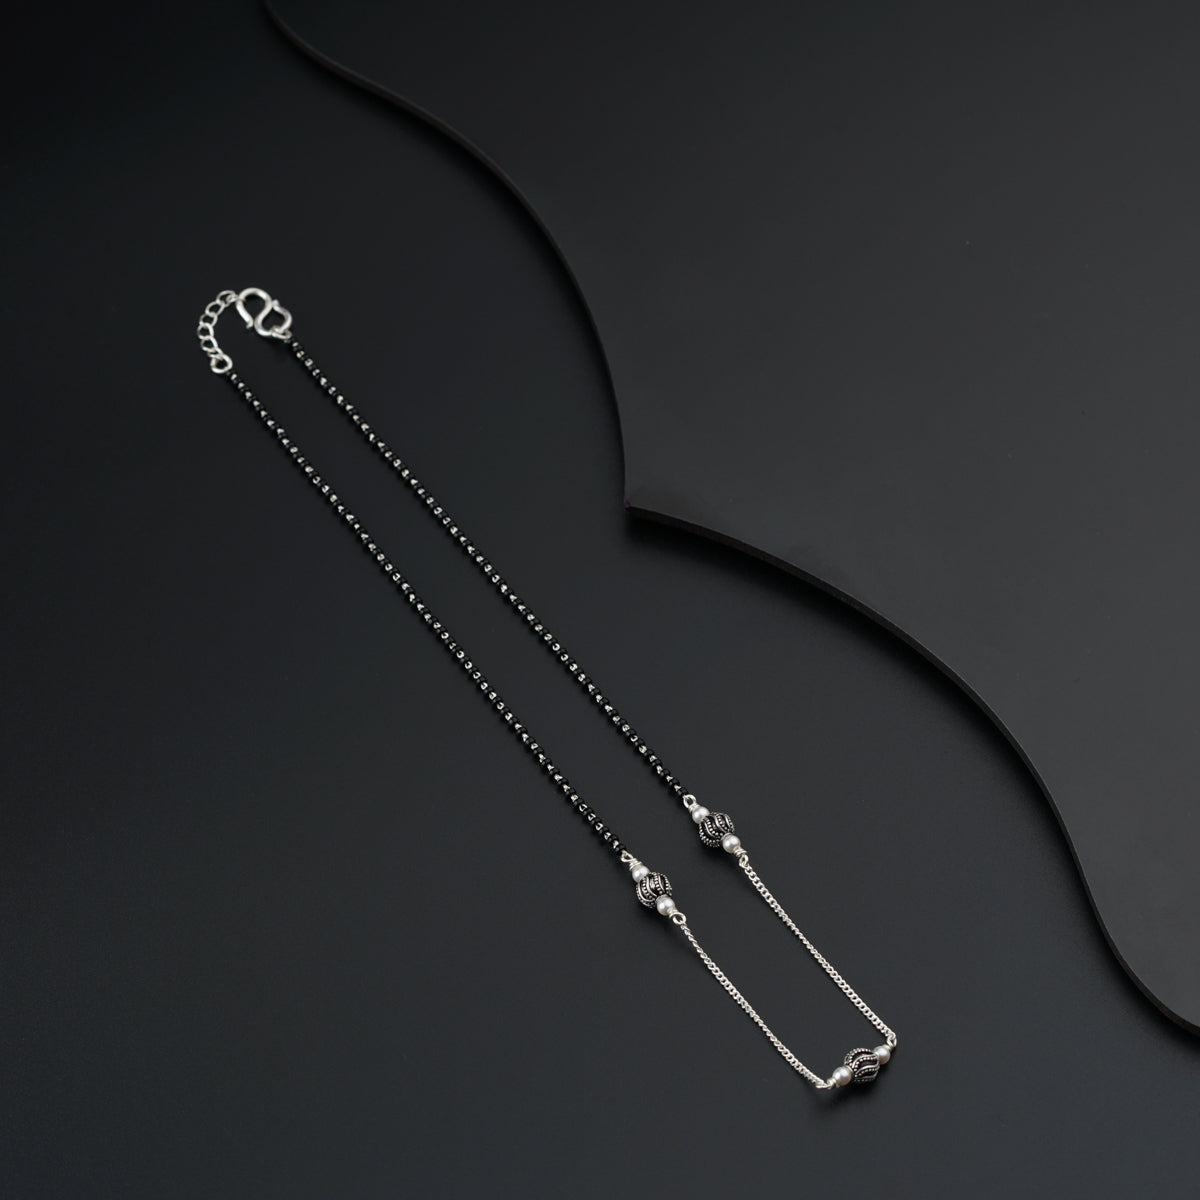 a necklace with a long chain and a clasp on a black background